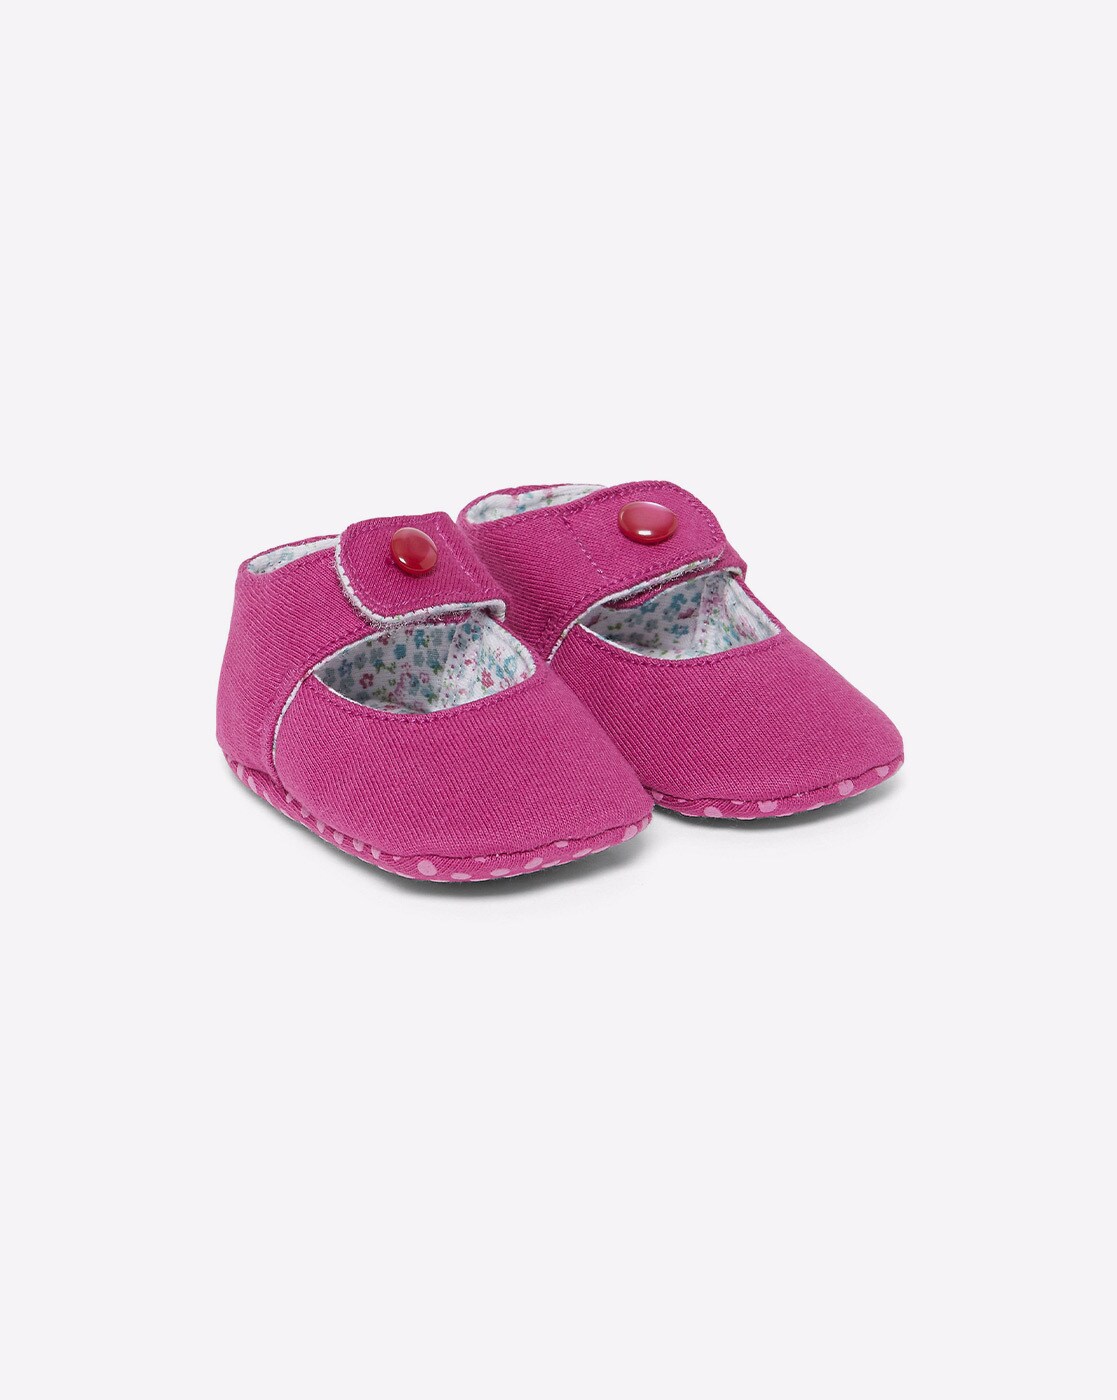 Pink Shoes for Infants by Mothercare 